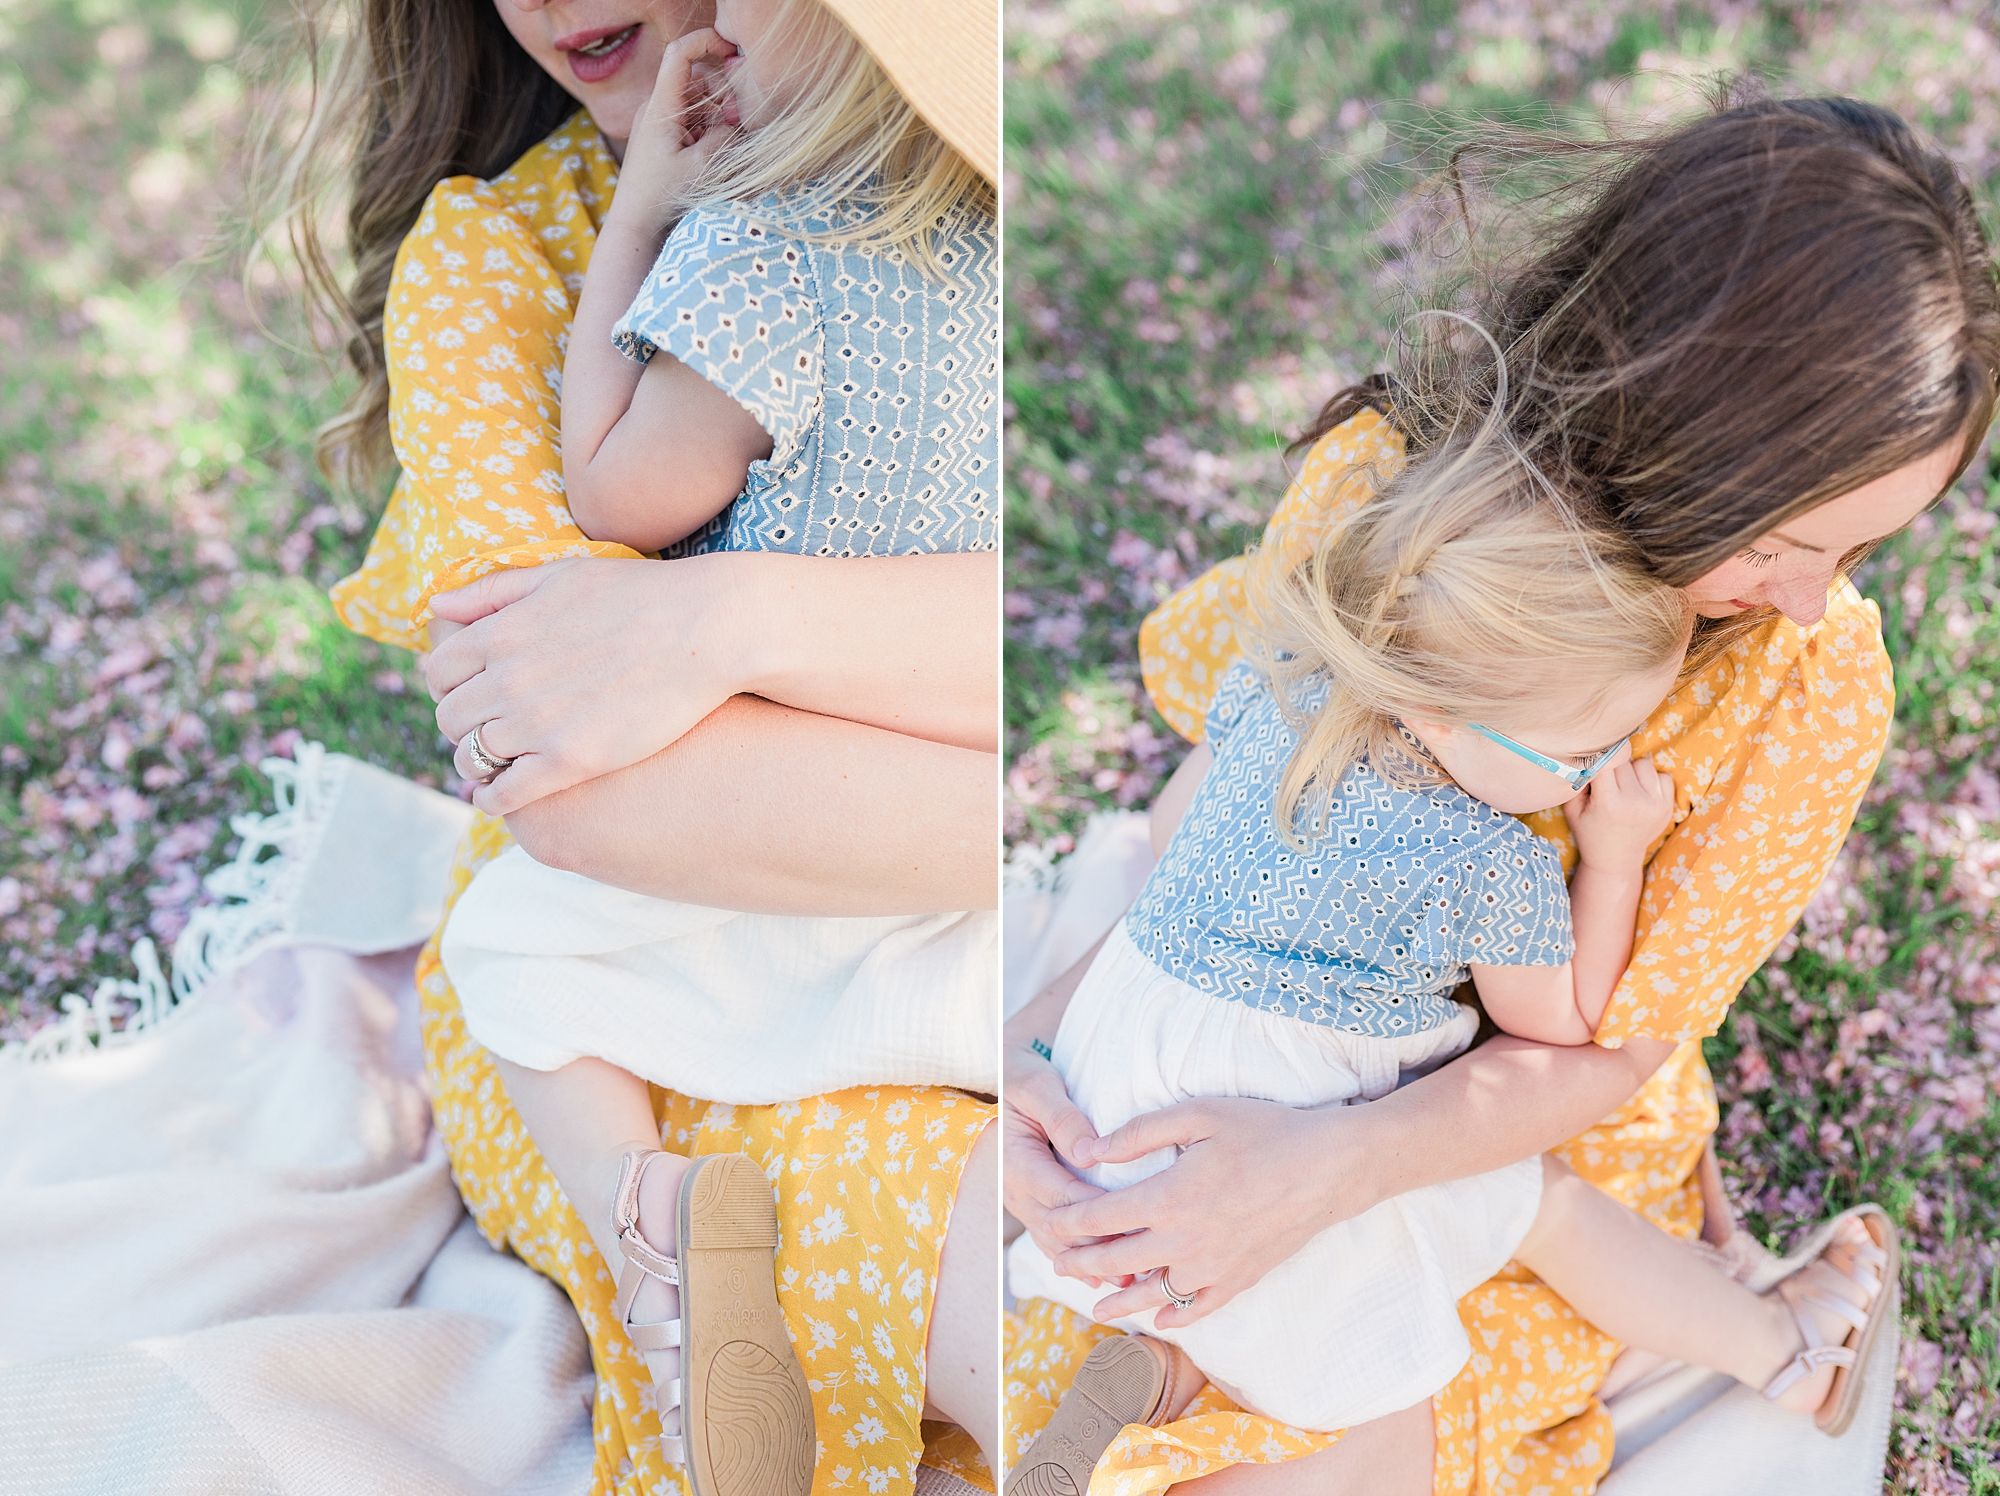 spring color palette for family photo outfits with mustard yellow, robin egg blue, and greys